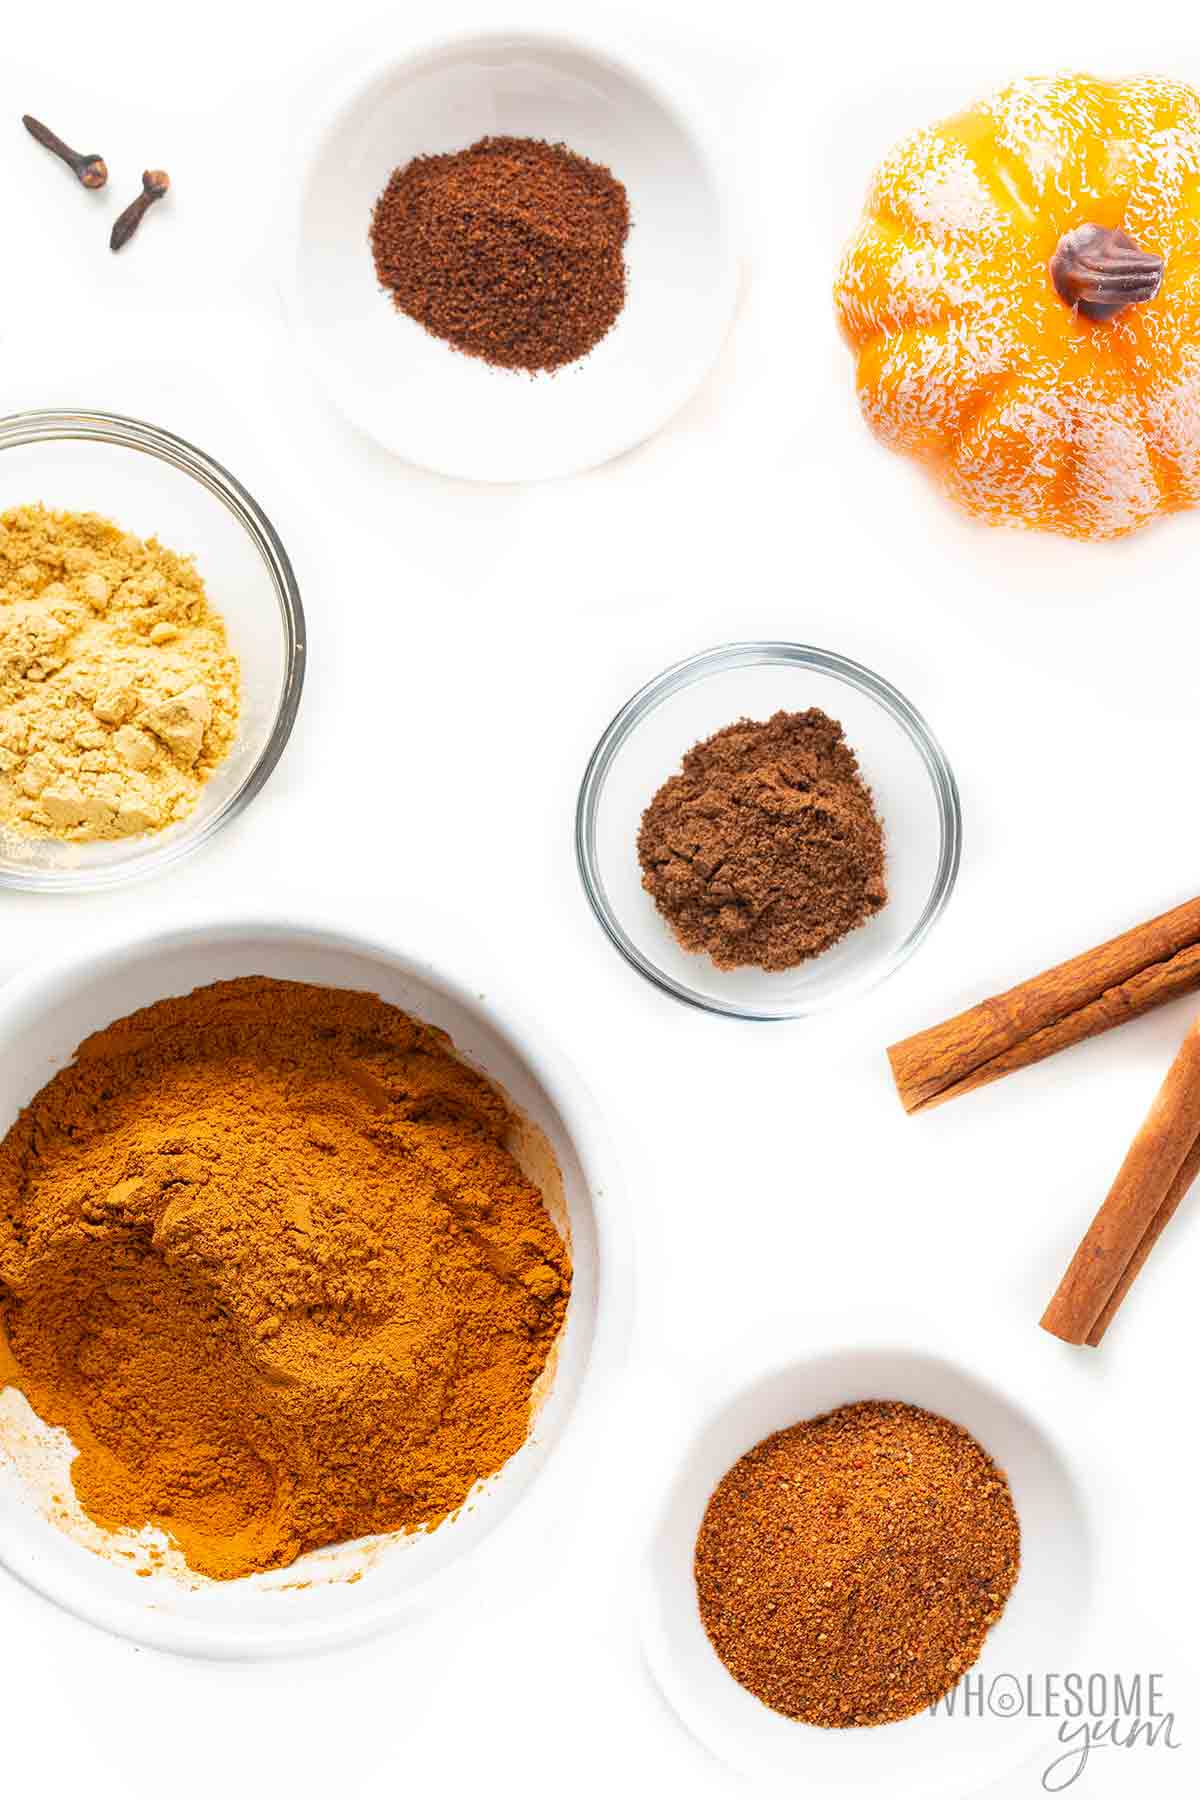 Pumpkin spice ingredients measured out in bowls.